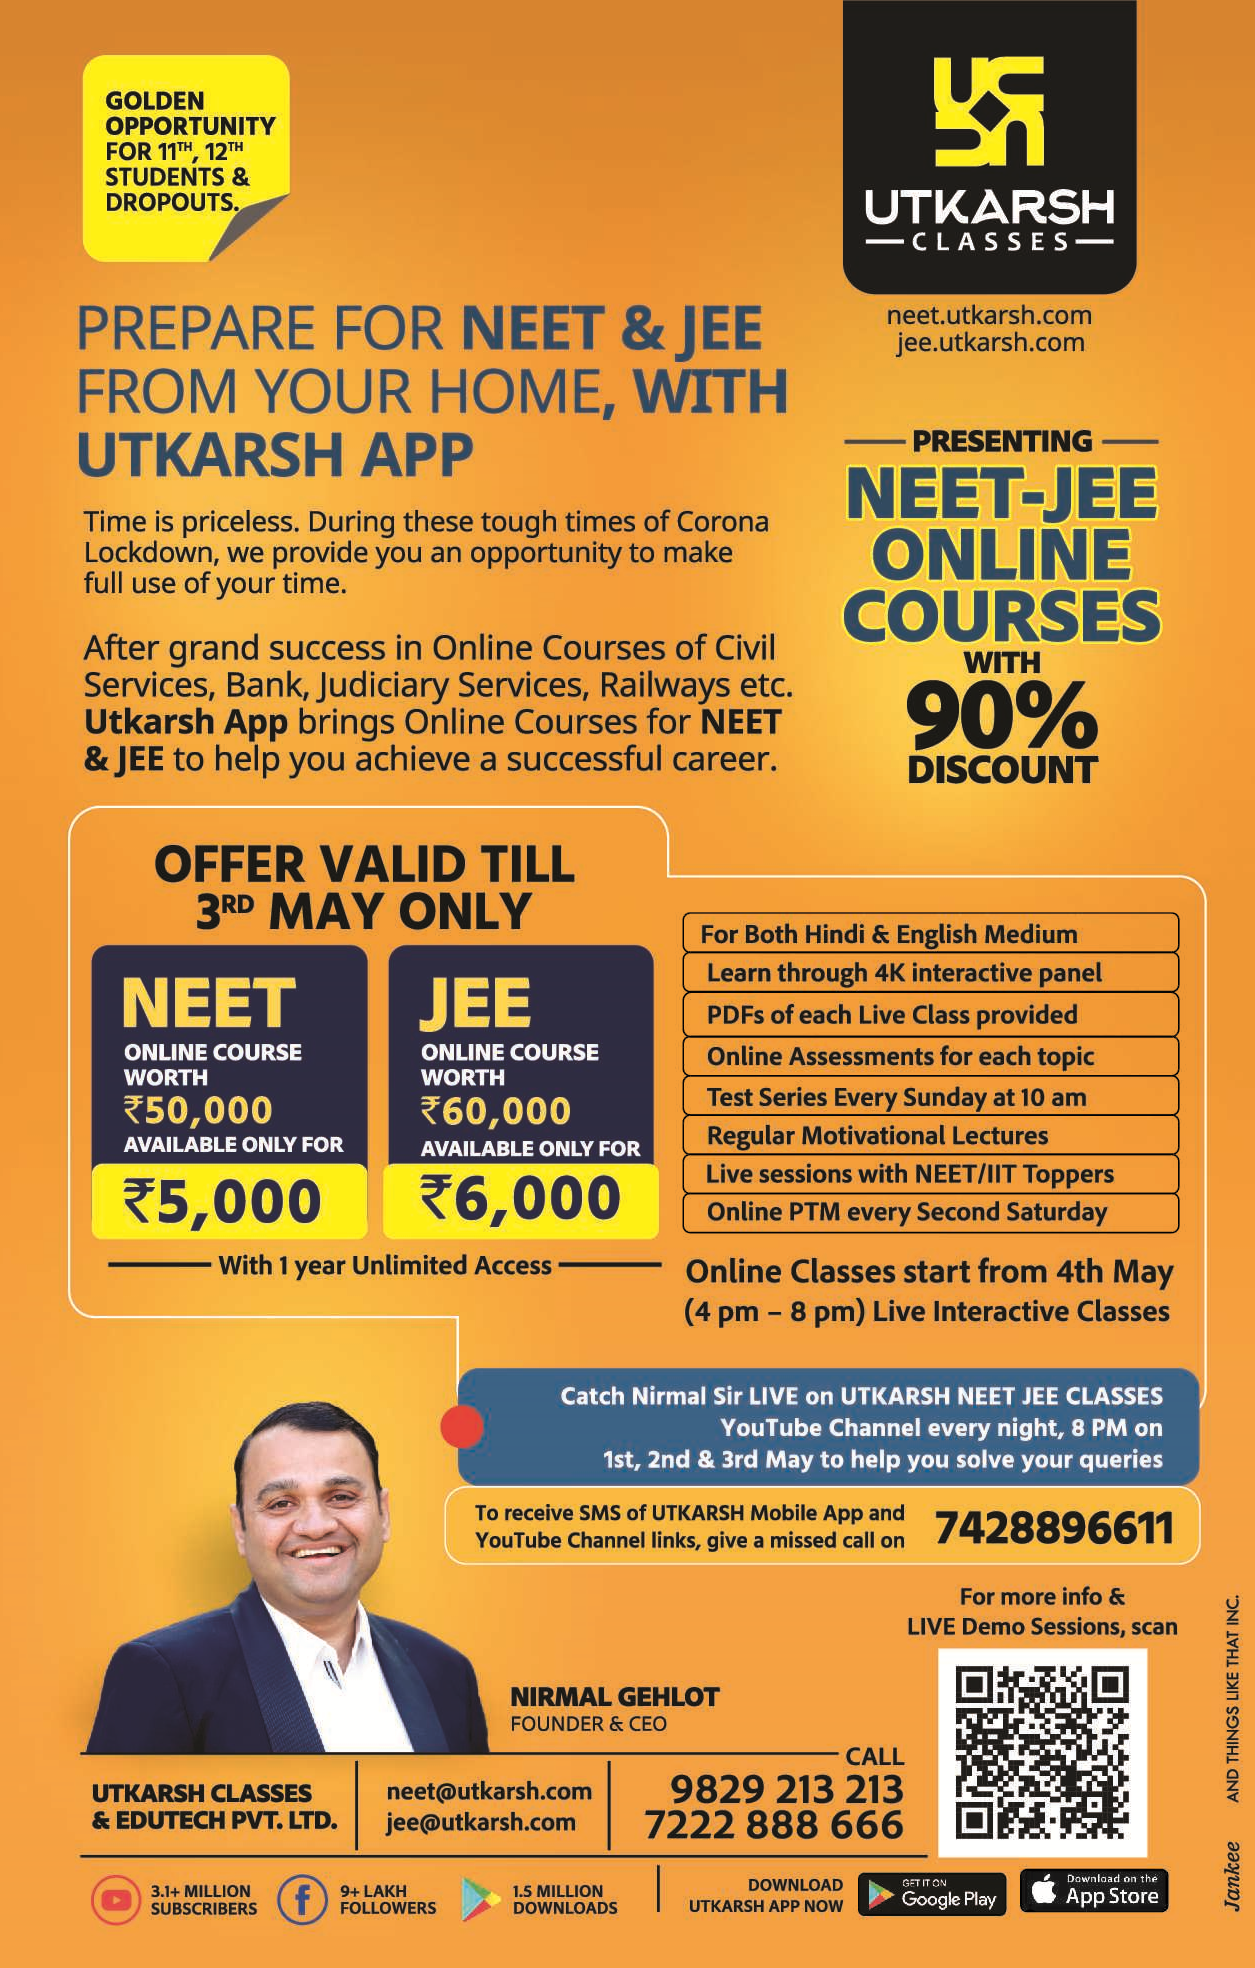 Prepare for NEET & JEE from your home